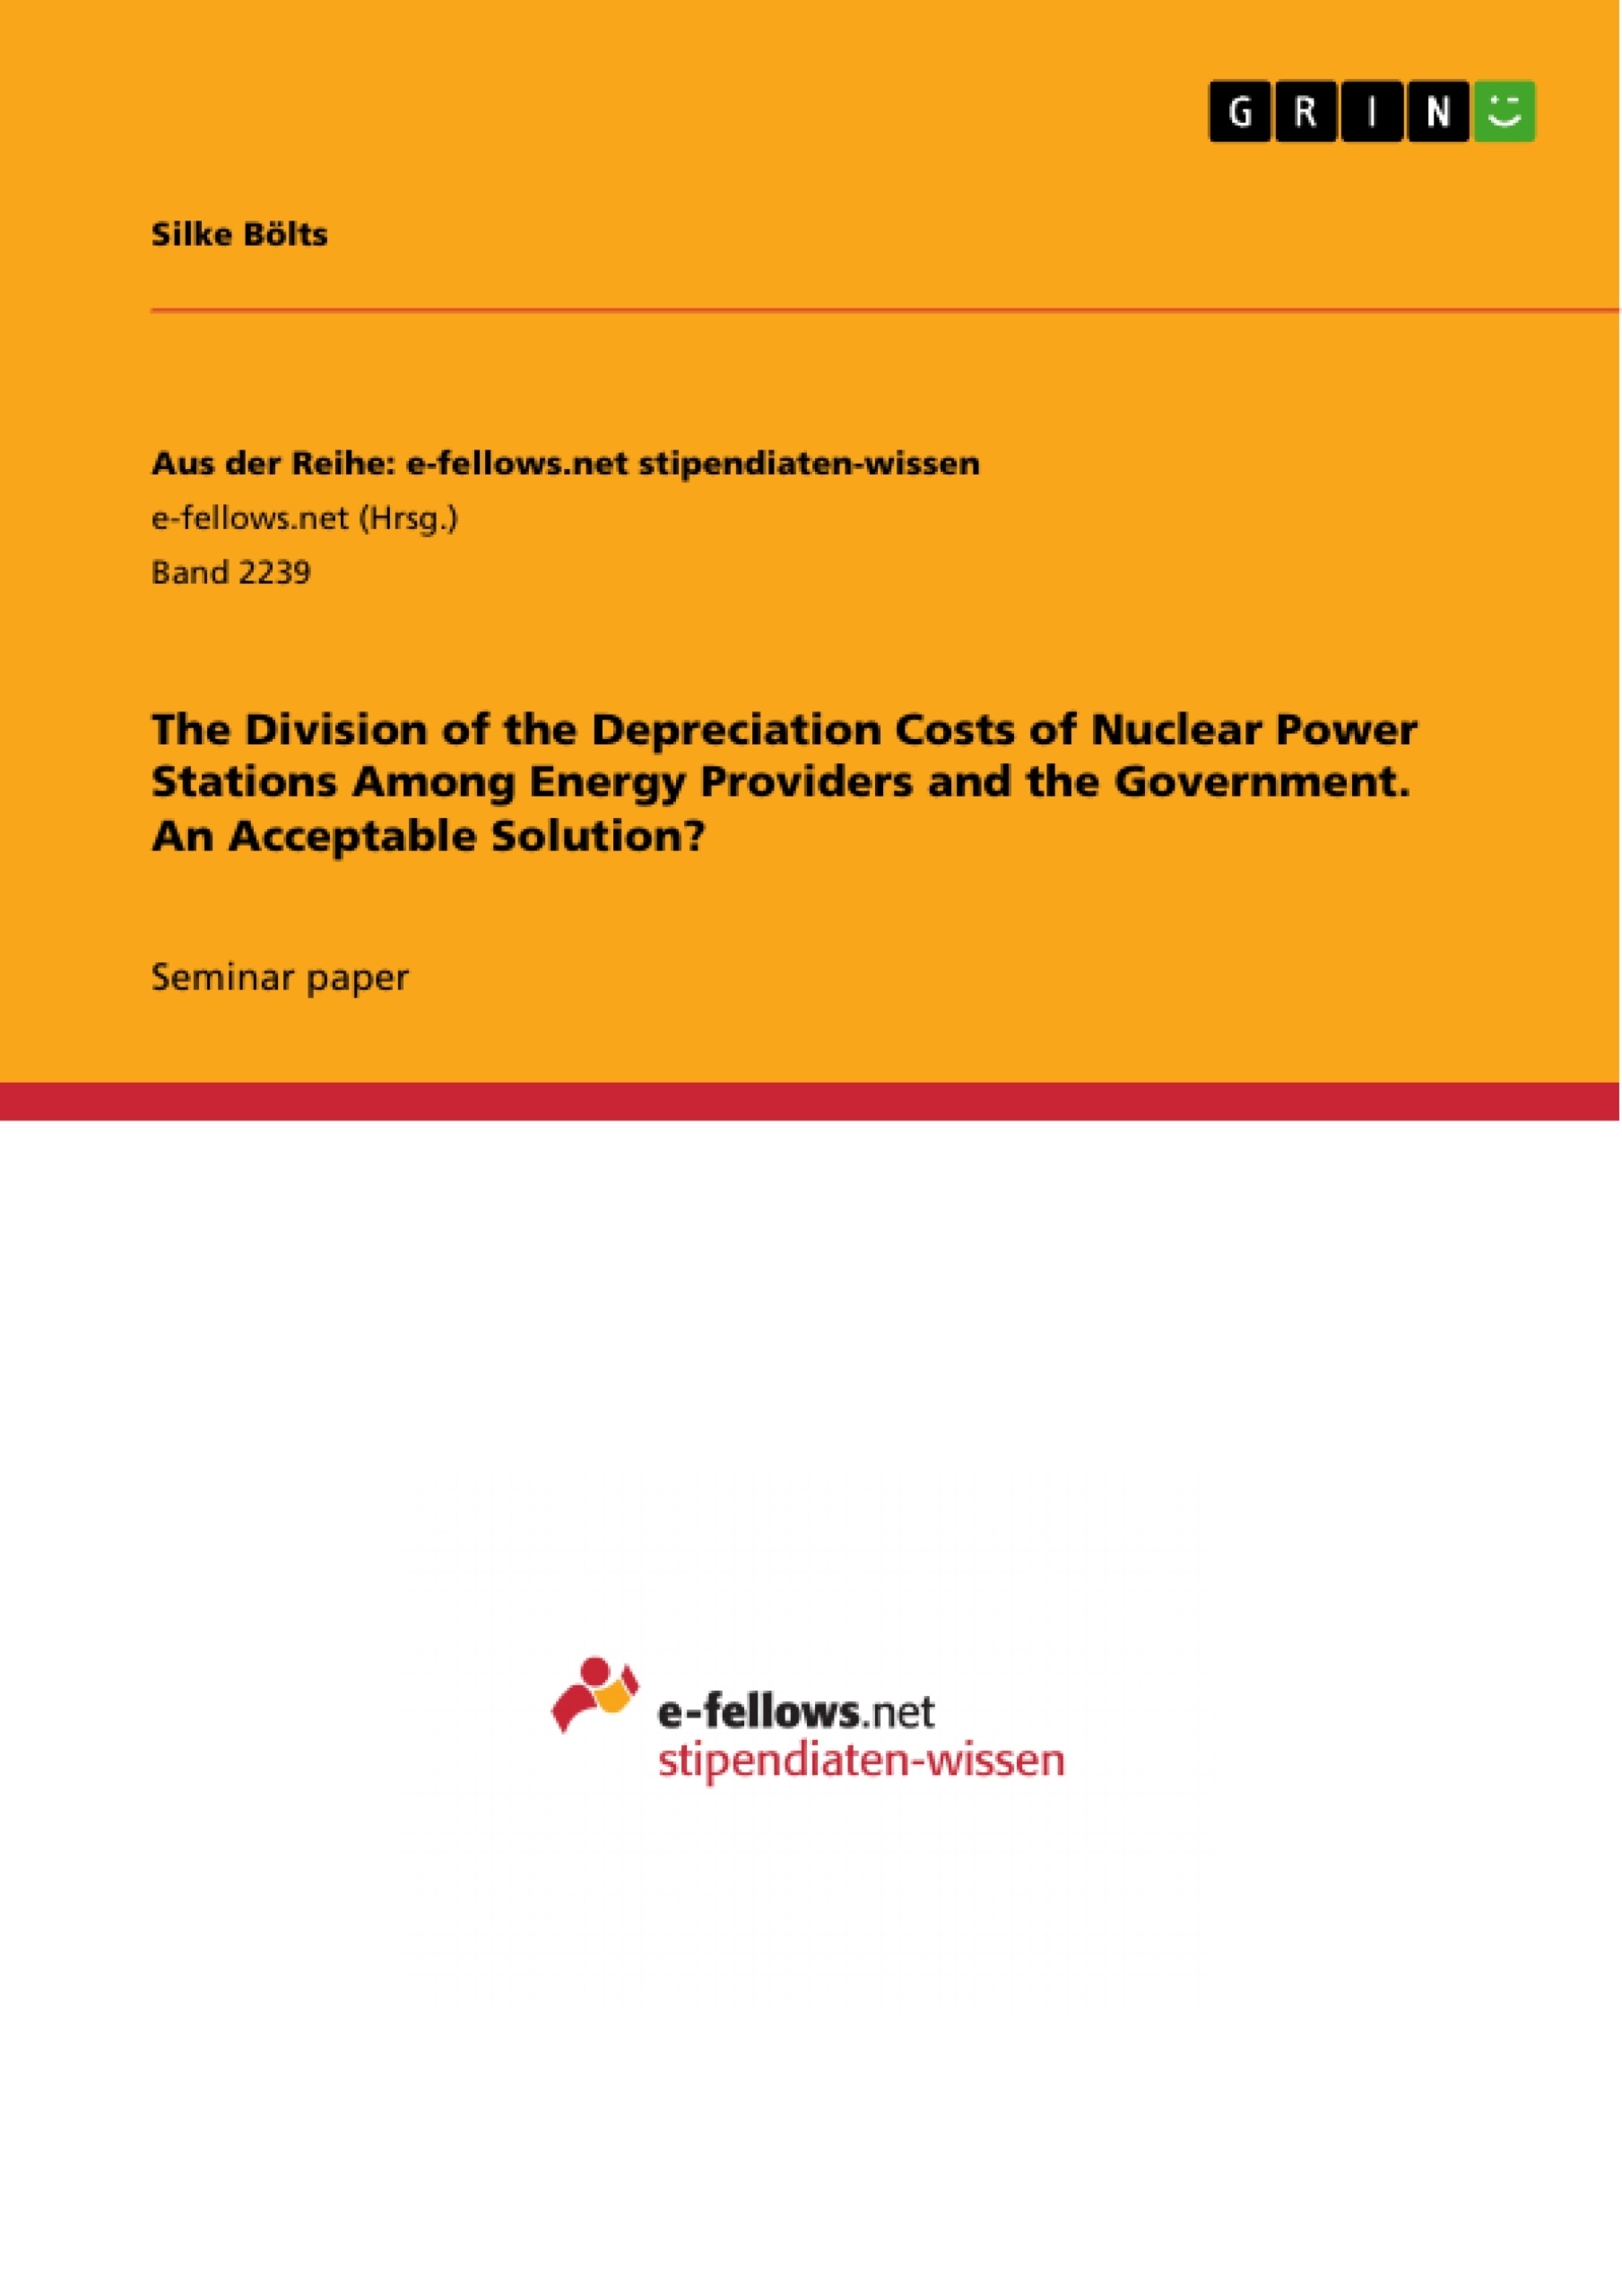 Title: The Division of the Depreciation Costs of Nuclear Power Stations Among Energy Providers and the Government. An Acceptable Solution?